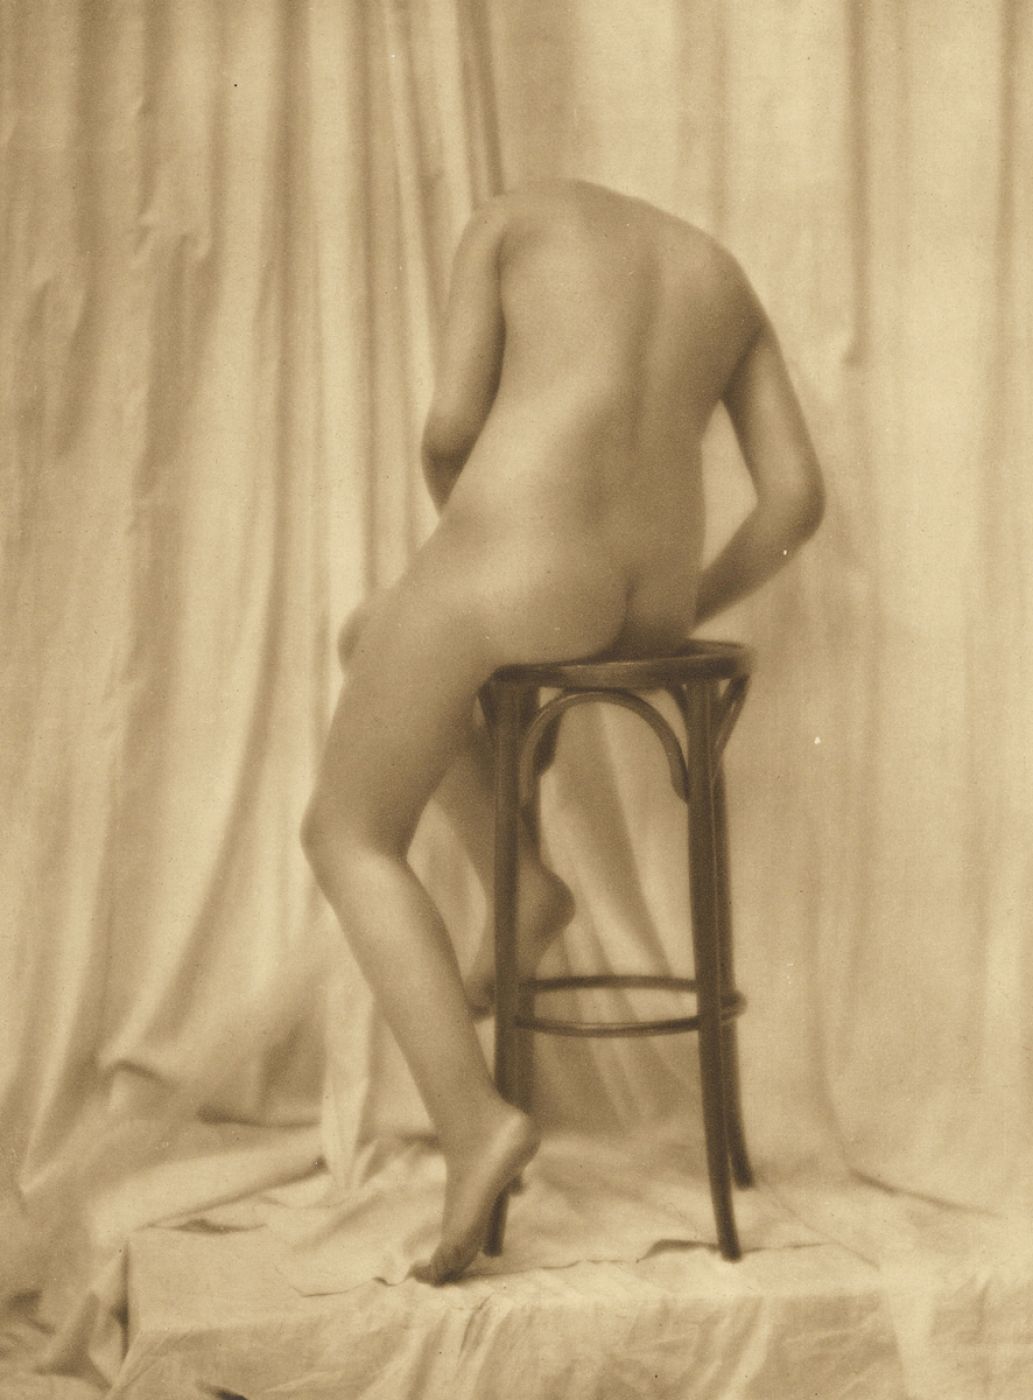  Lucien Waléry, “Untitled (from “Nus" Series)”, 1920 ca.